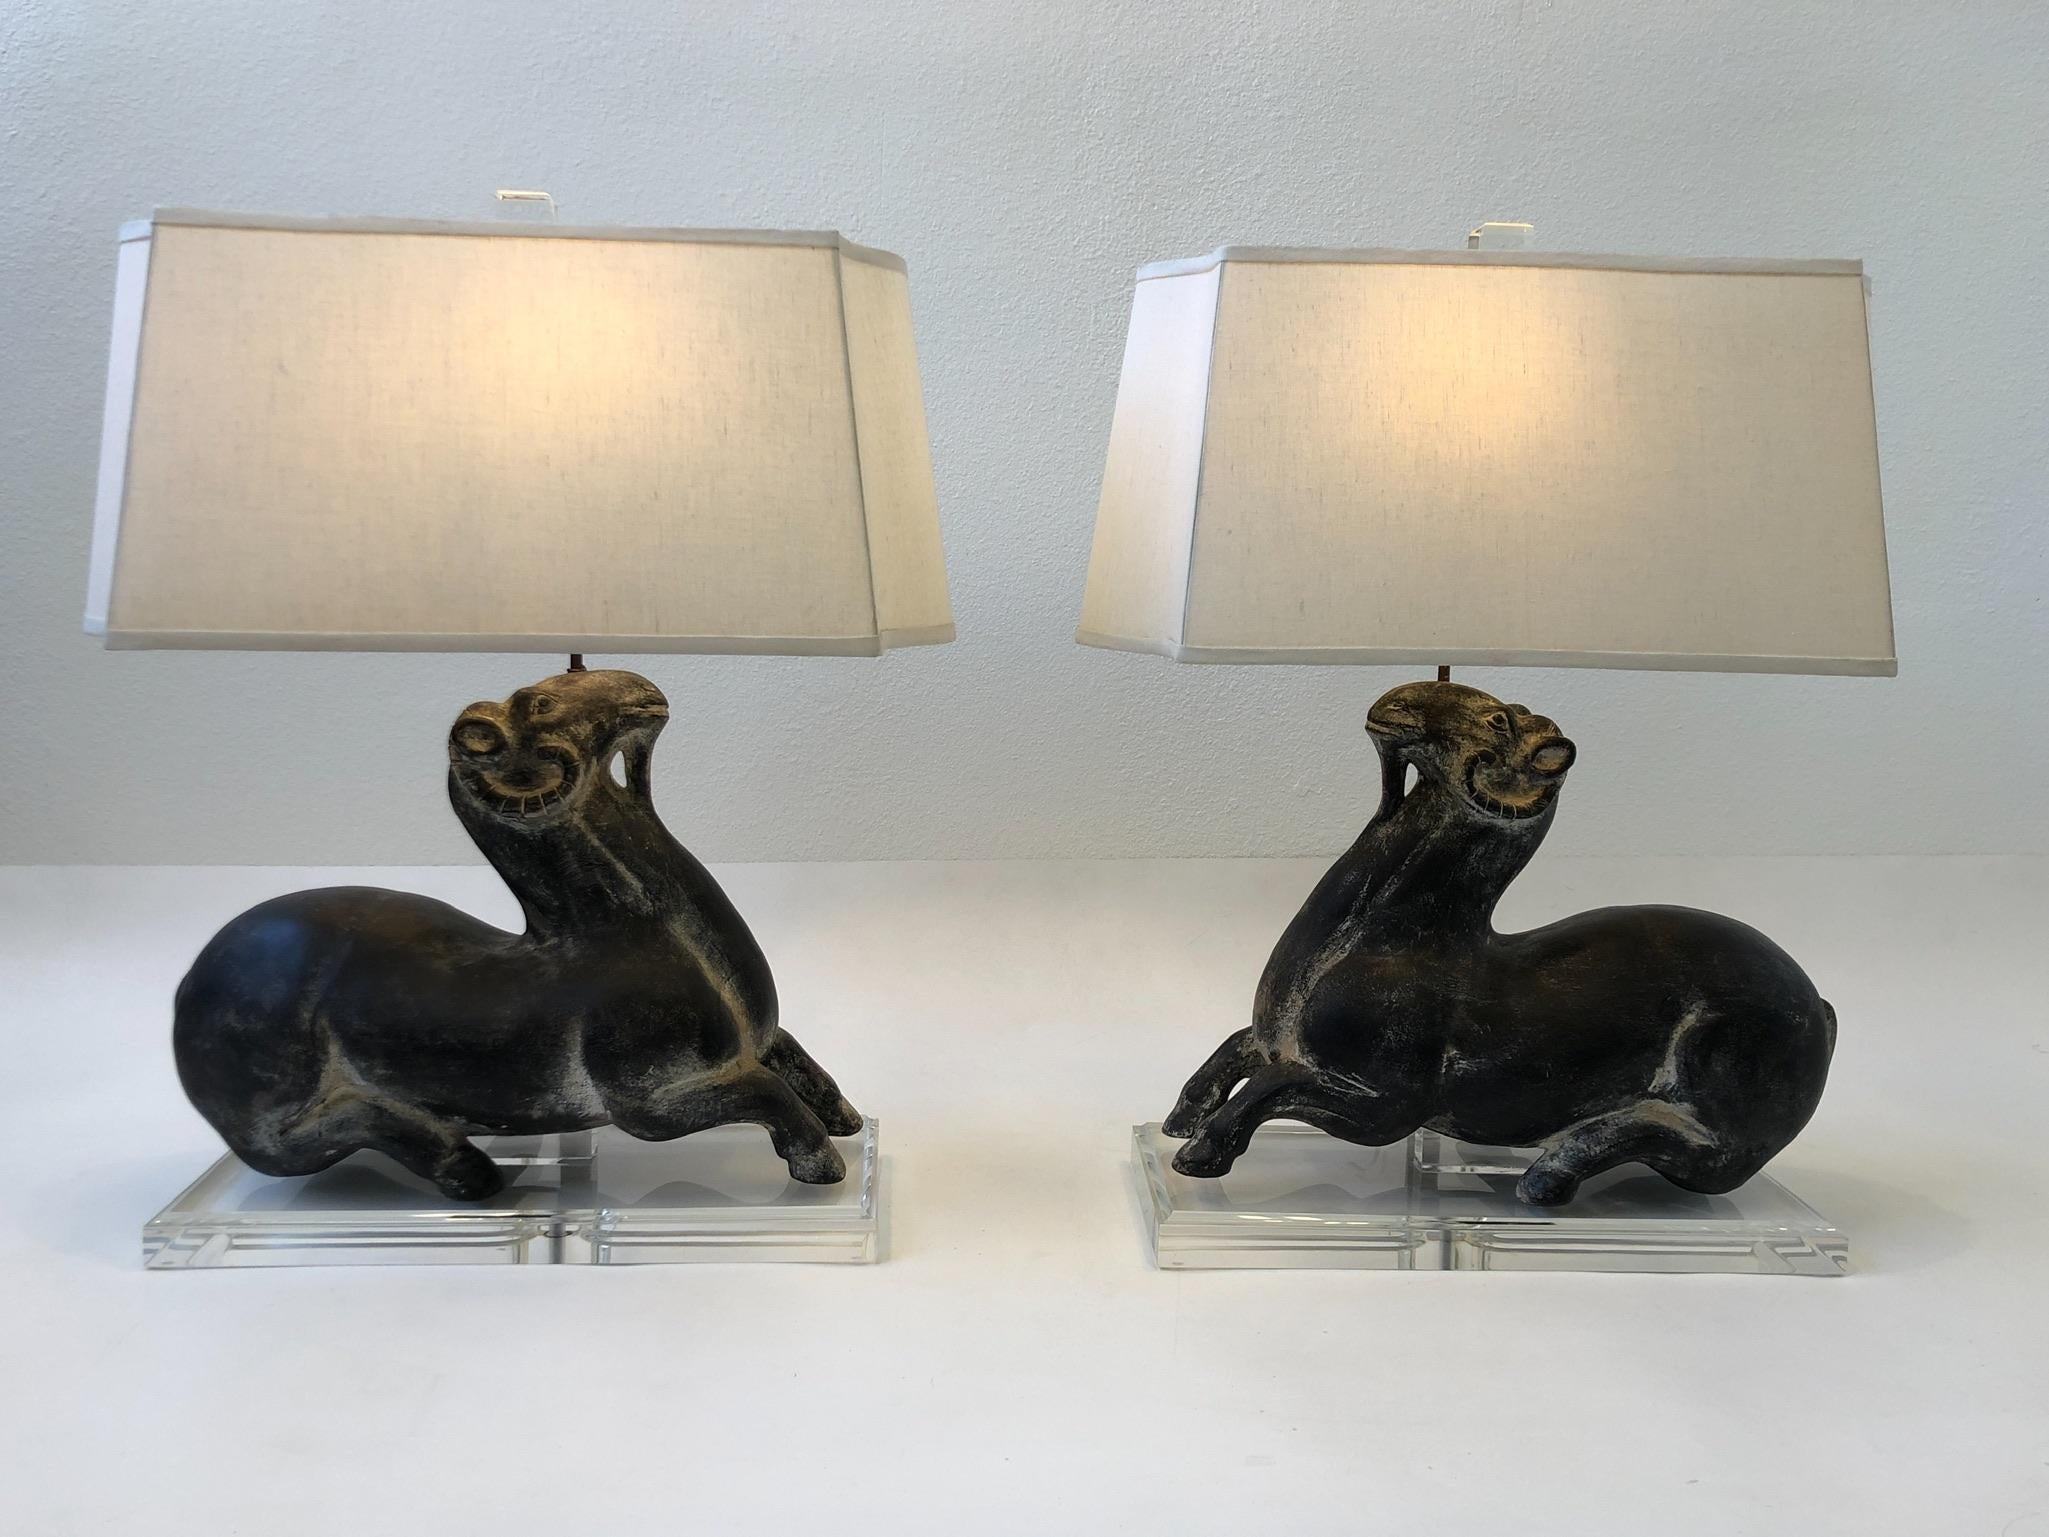 Pair of Ceramic Goats and Lucite Table Lamps by Steve Chase For Sale 4